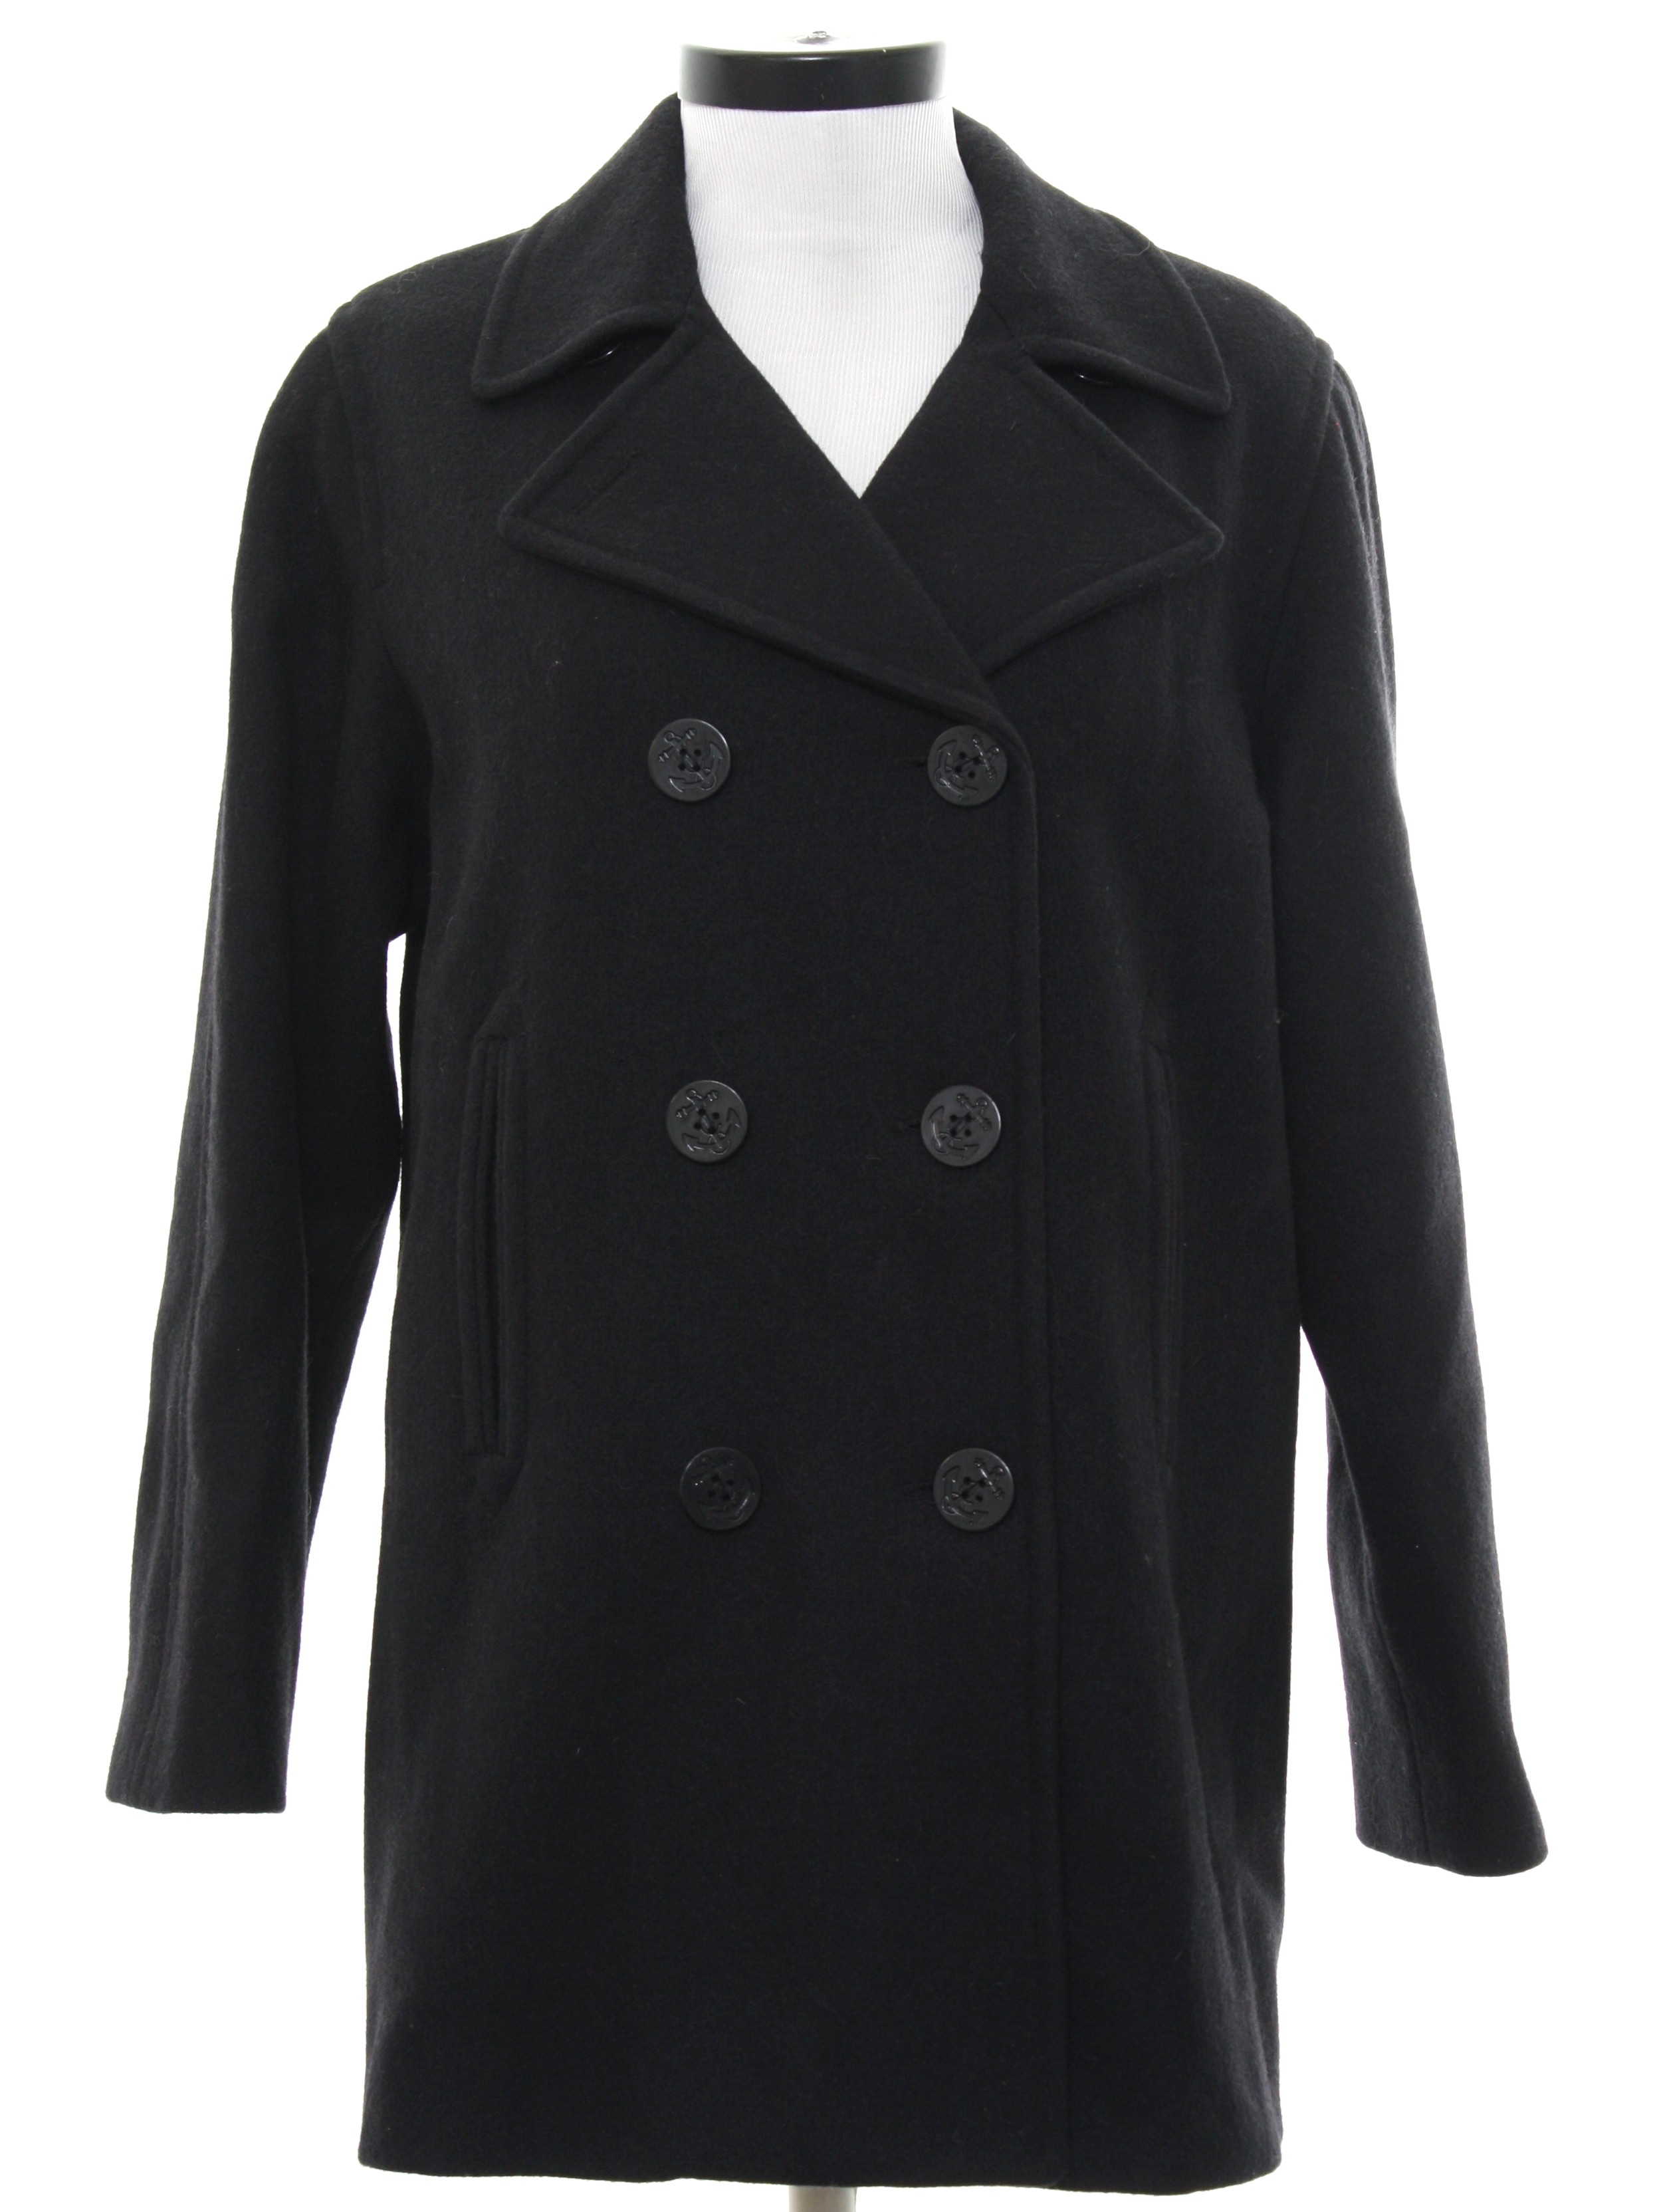 Long Pea Coat for Women That Never Goes Out of Style for 2019 | Fit Coat